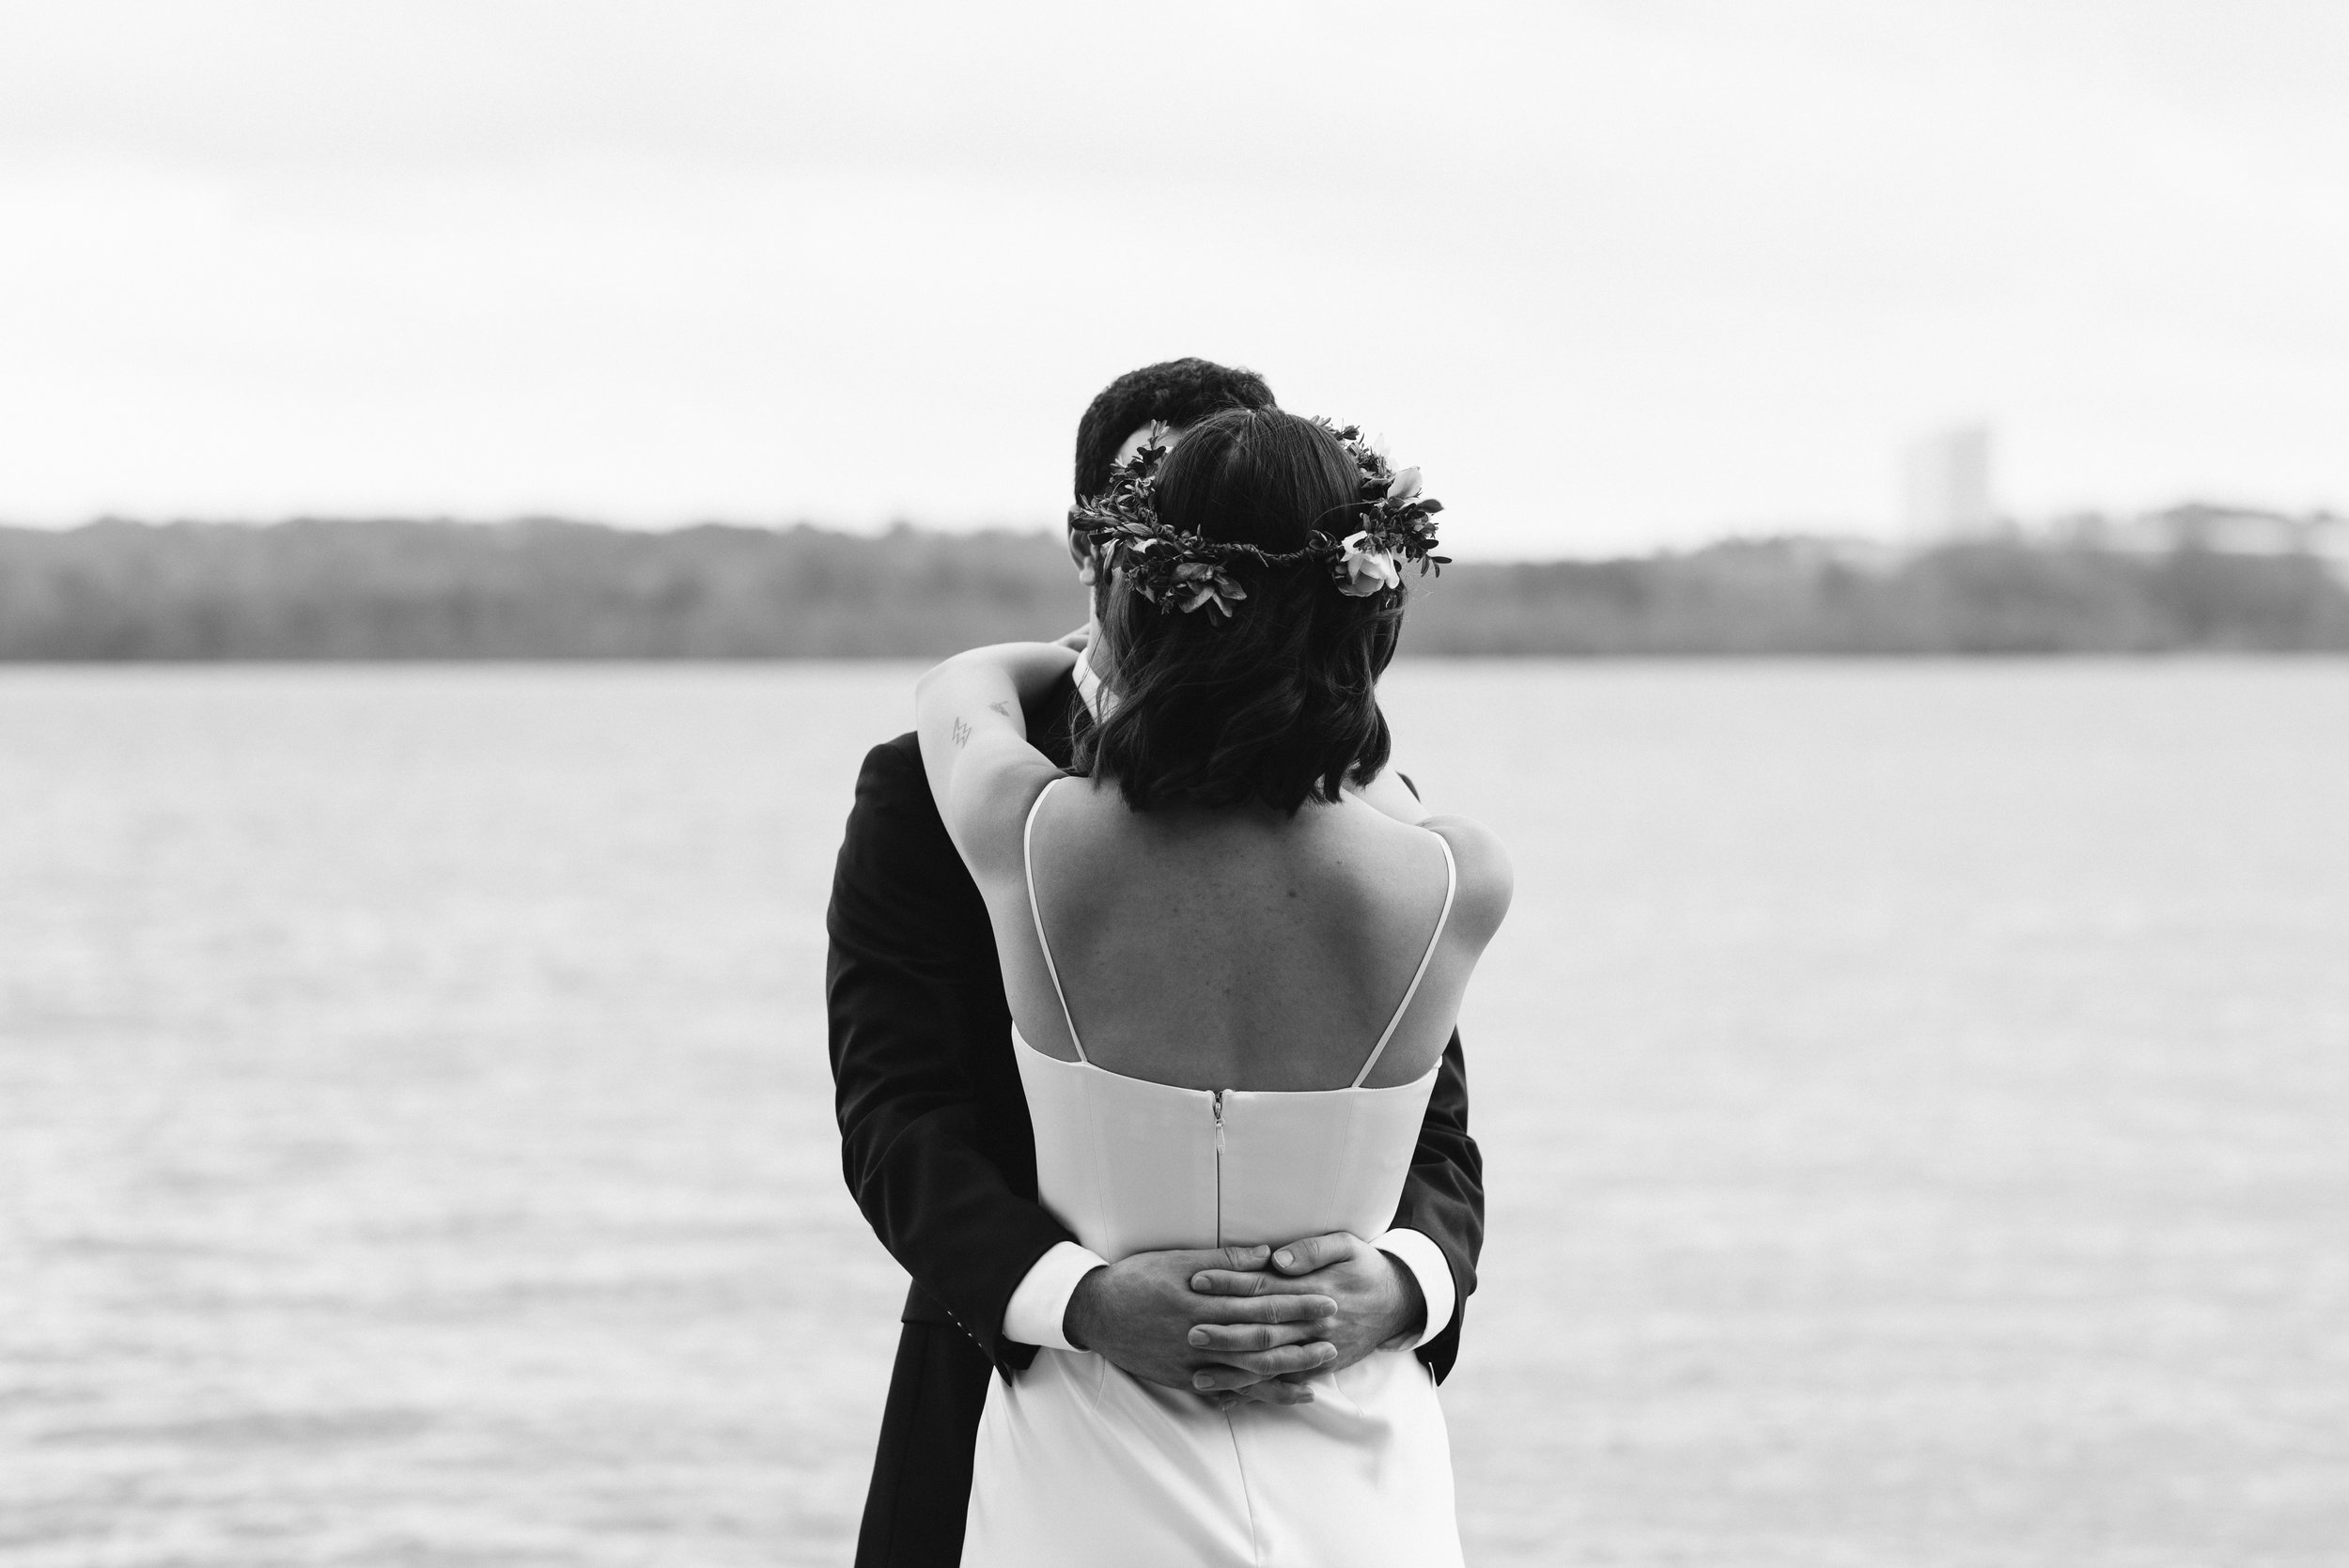  Washington DC, Baltimore Wedding Photographer, Alexandria, Old Town, Jewel Tone, Romantic, Modern, Bride and Groom Holding Each Other, Photo from Behind, Black and White 